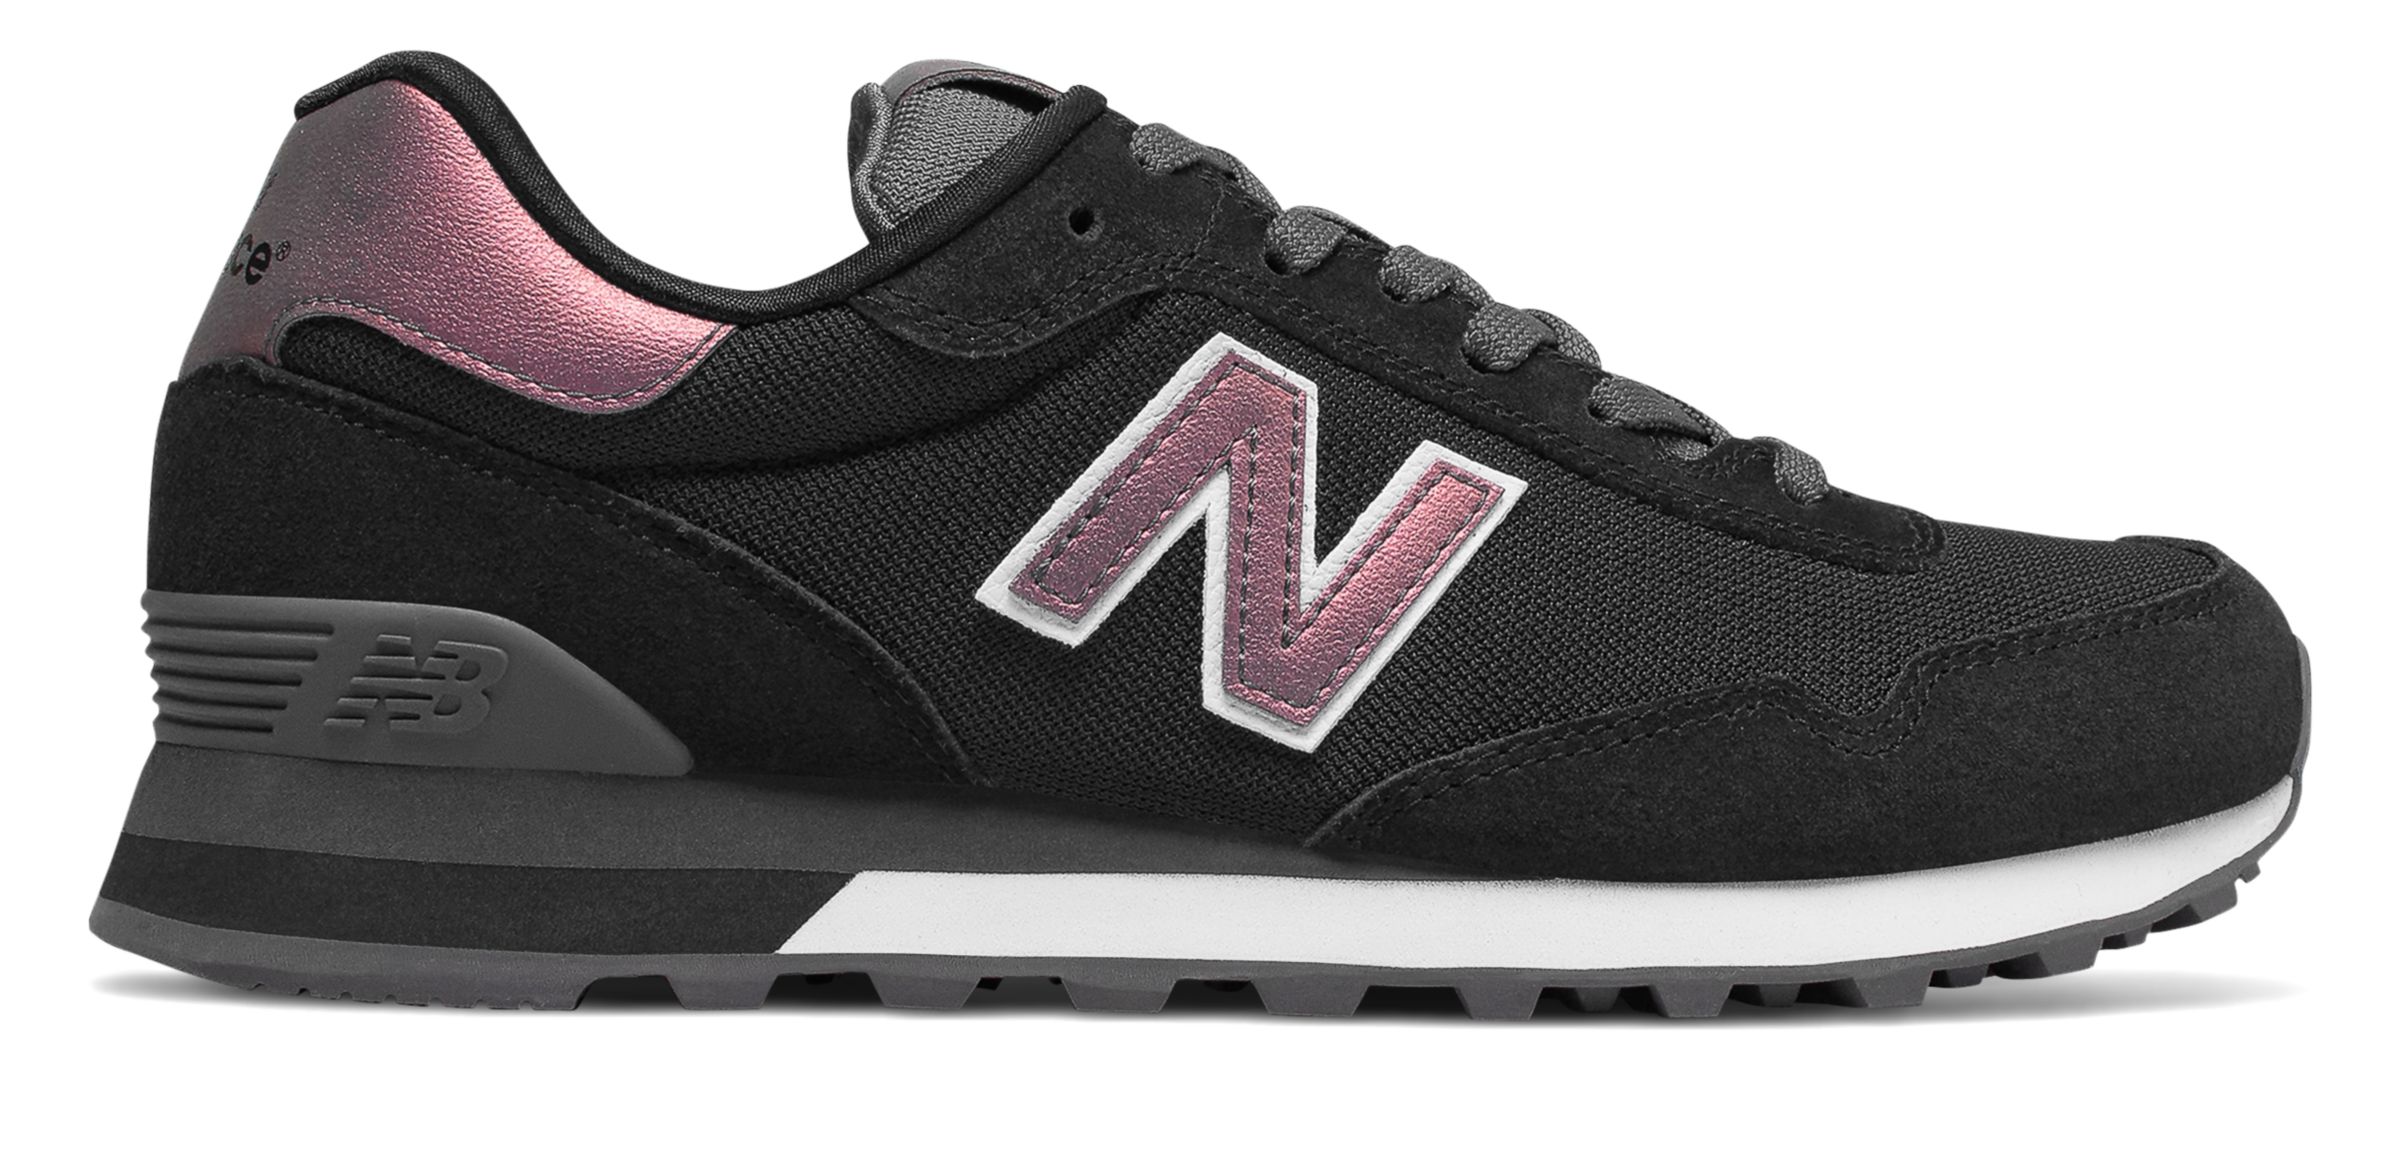 New Balance WL515 on Sale - Discounts Up to 40% Off on WL515CSD at Joe's New  Balance Outlet